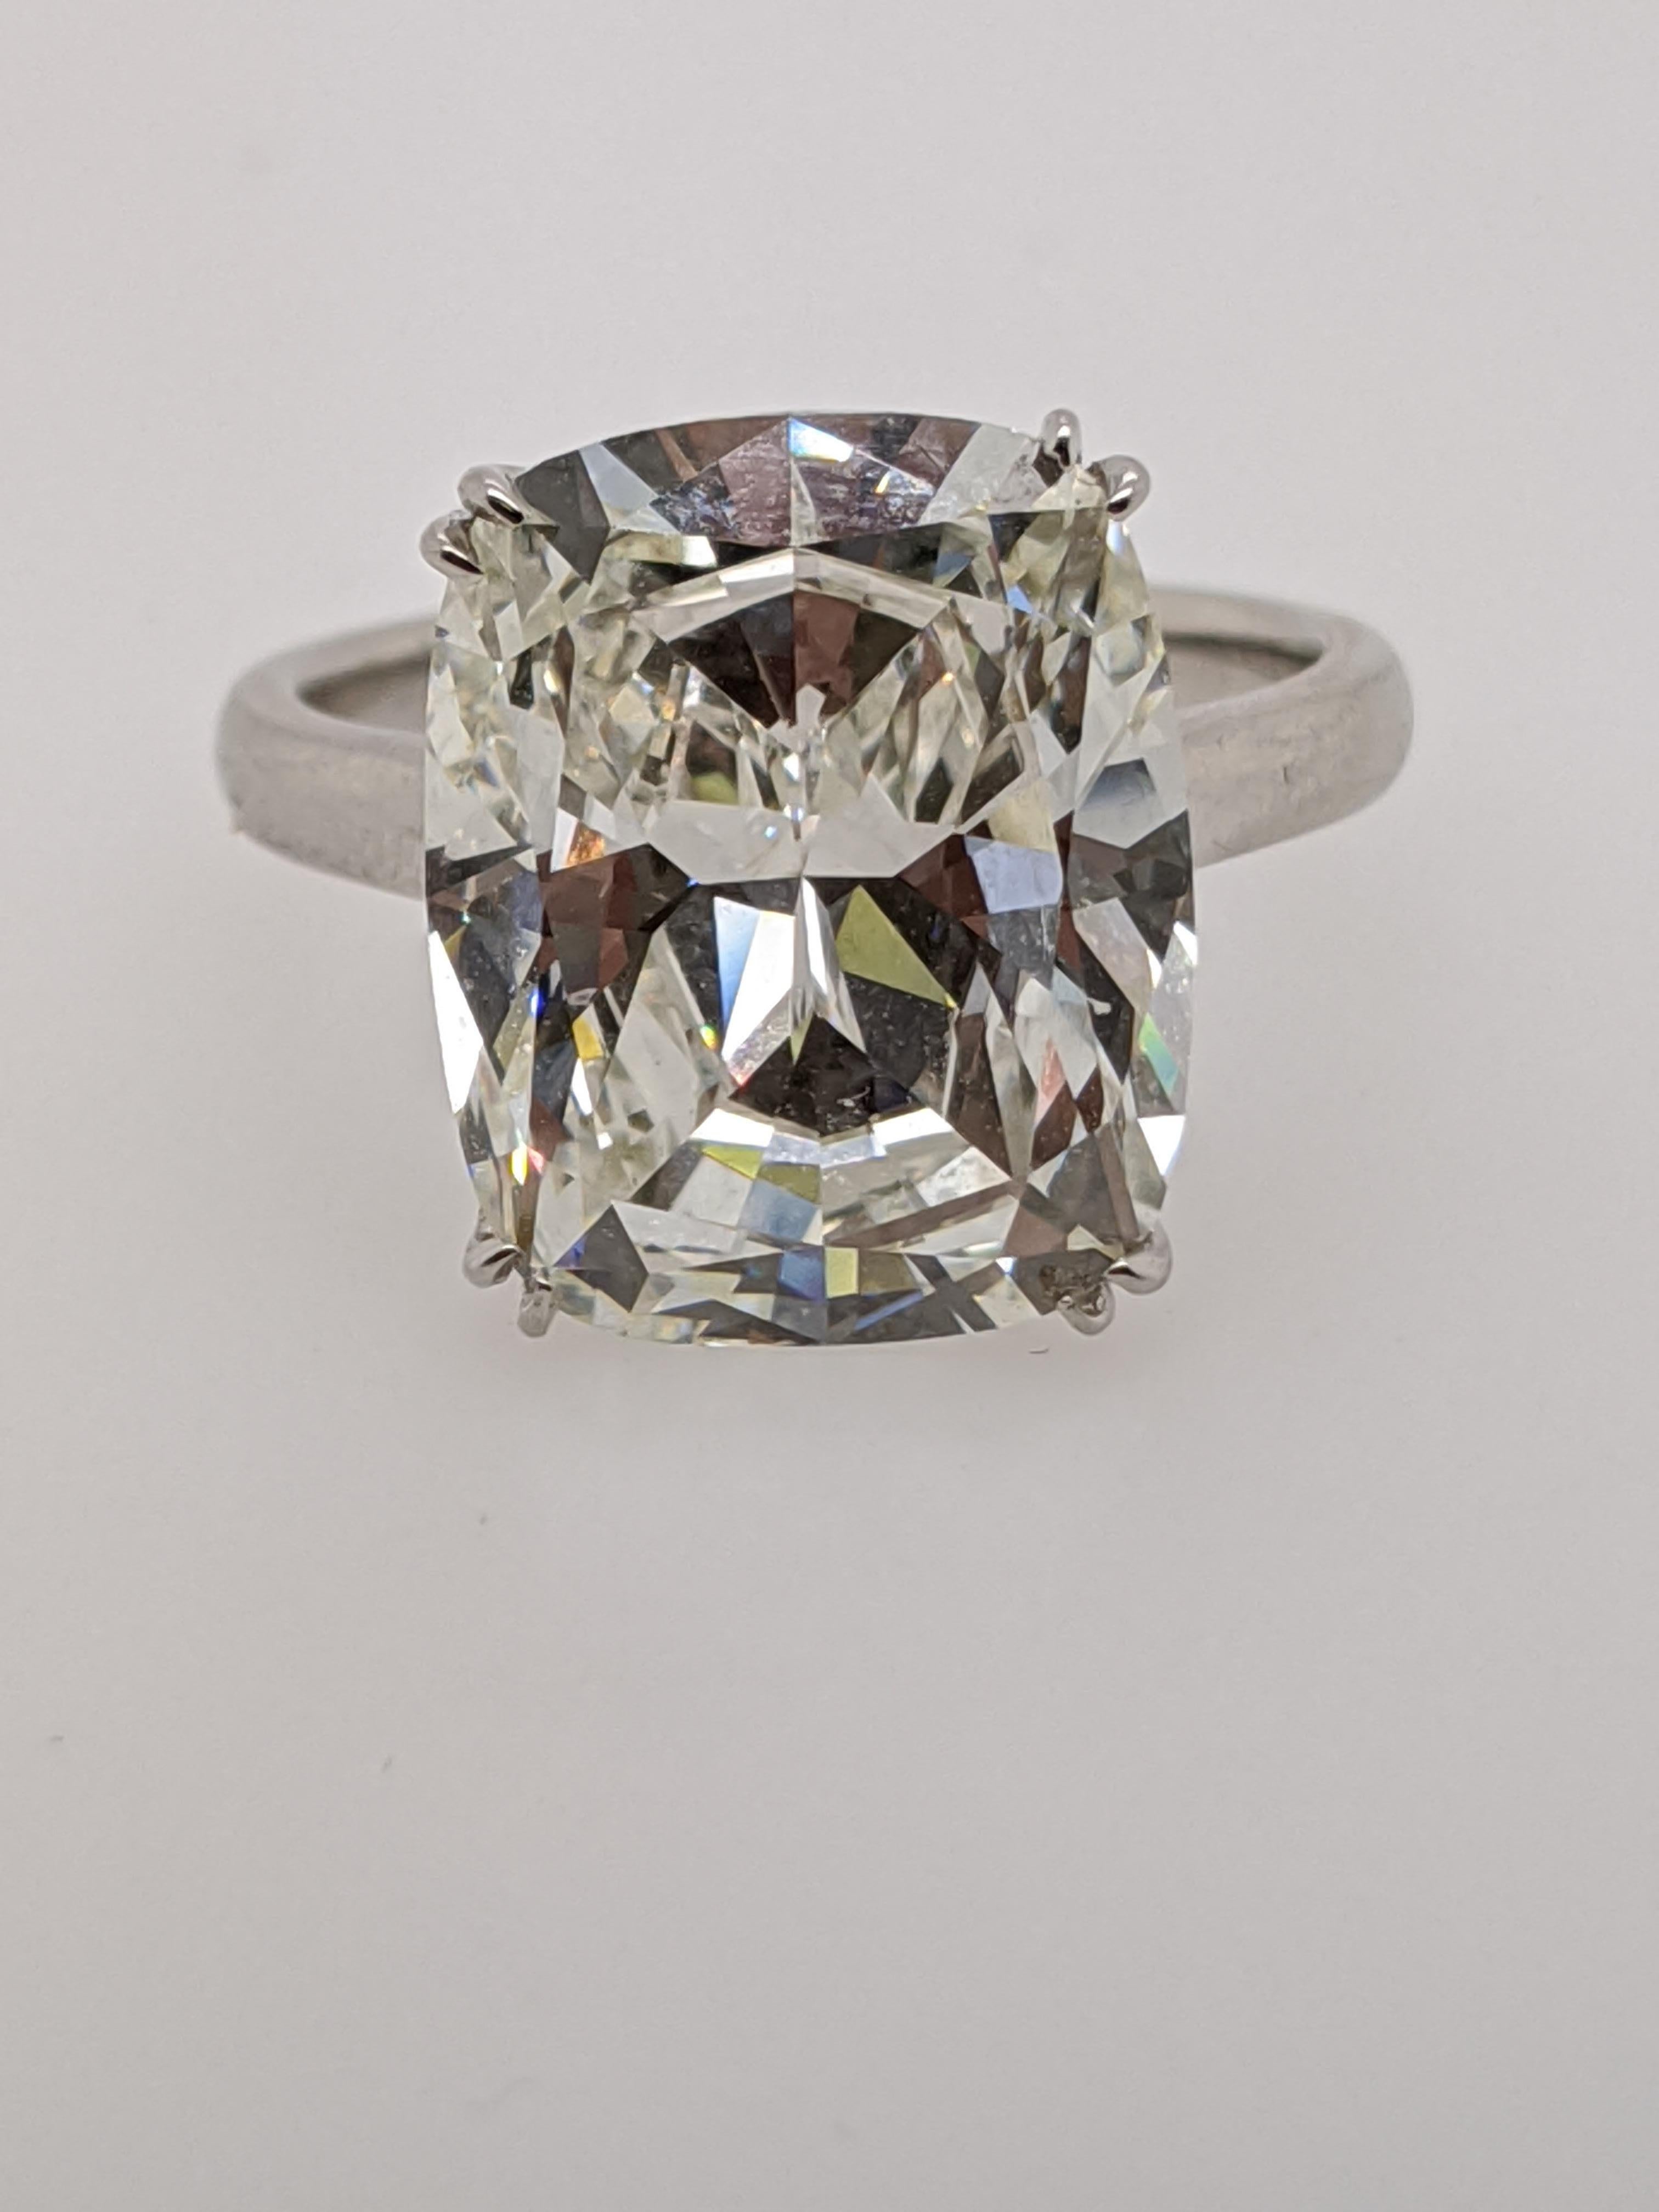 9.58 carat Classic Antique Style Cushion Cut Diamond Ring in Platinum mounting handmade in the United States.  Featuring a K color VS1 clarity antique style cushion with GIA grading report number 6204270435.

This listing has one of hundreds of